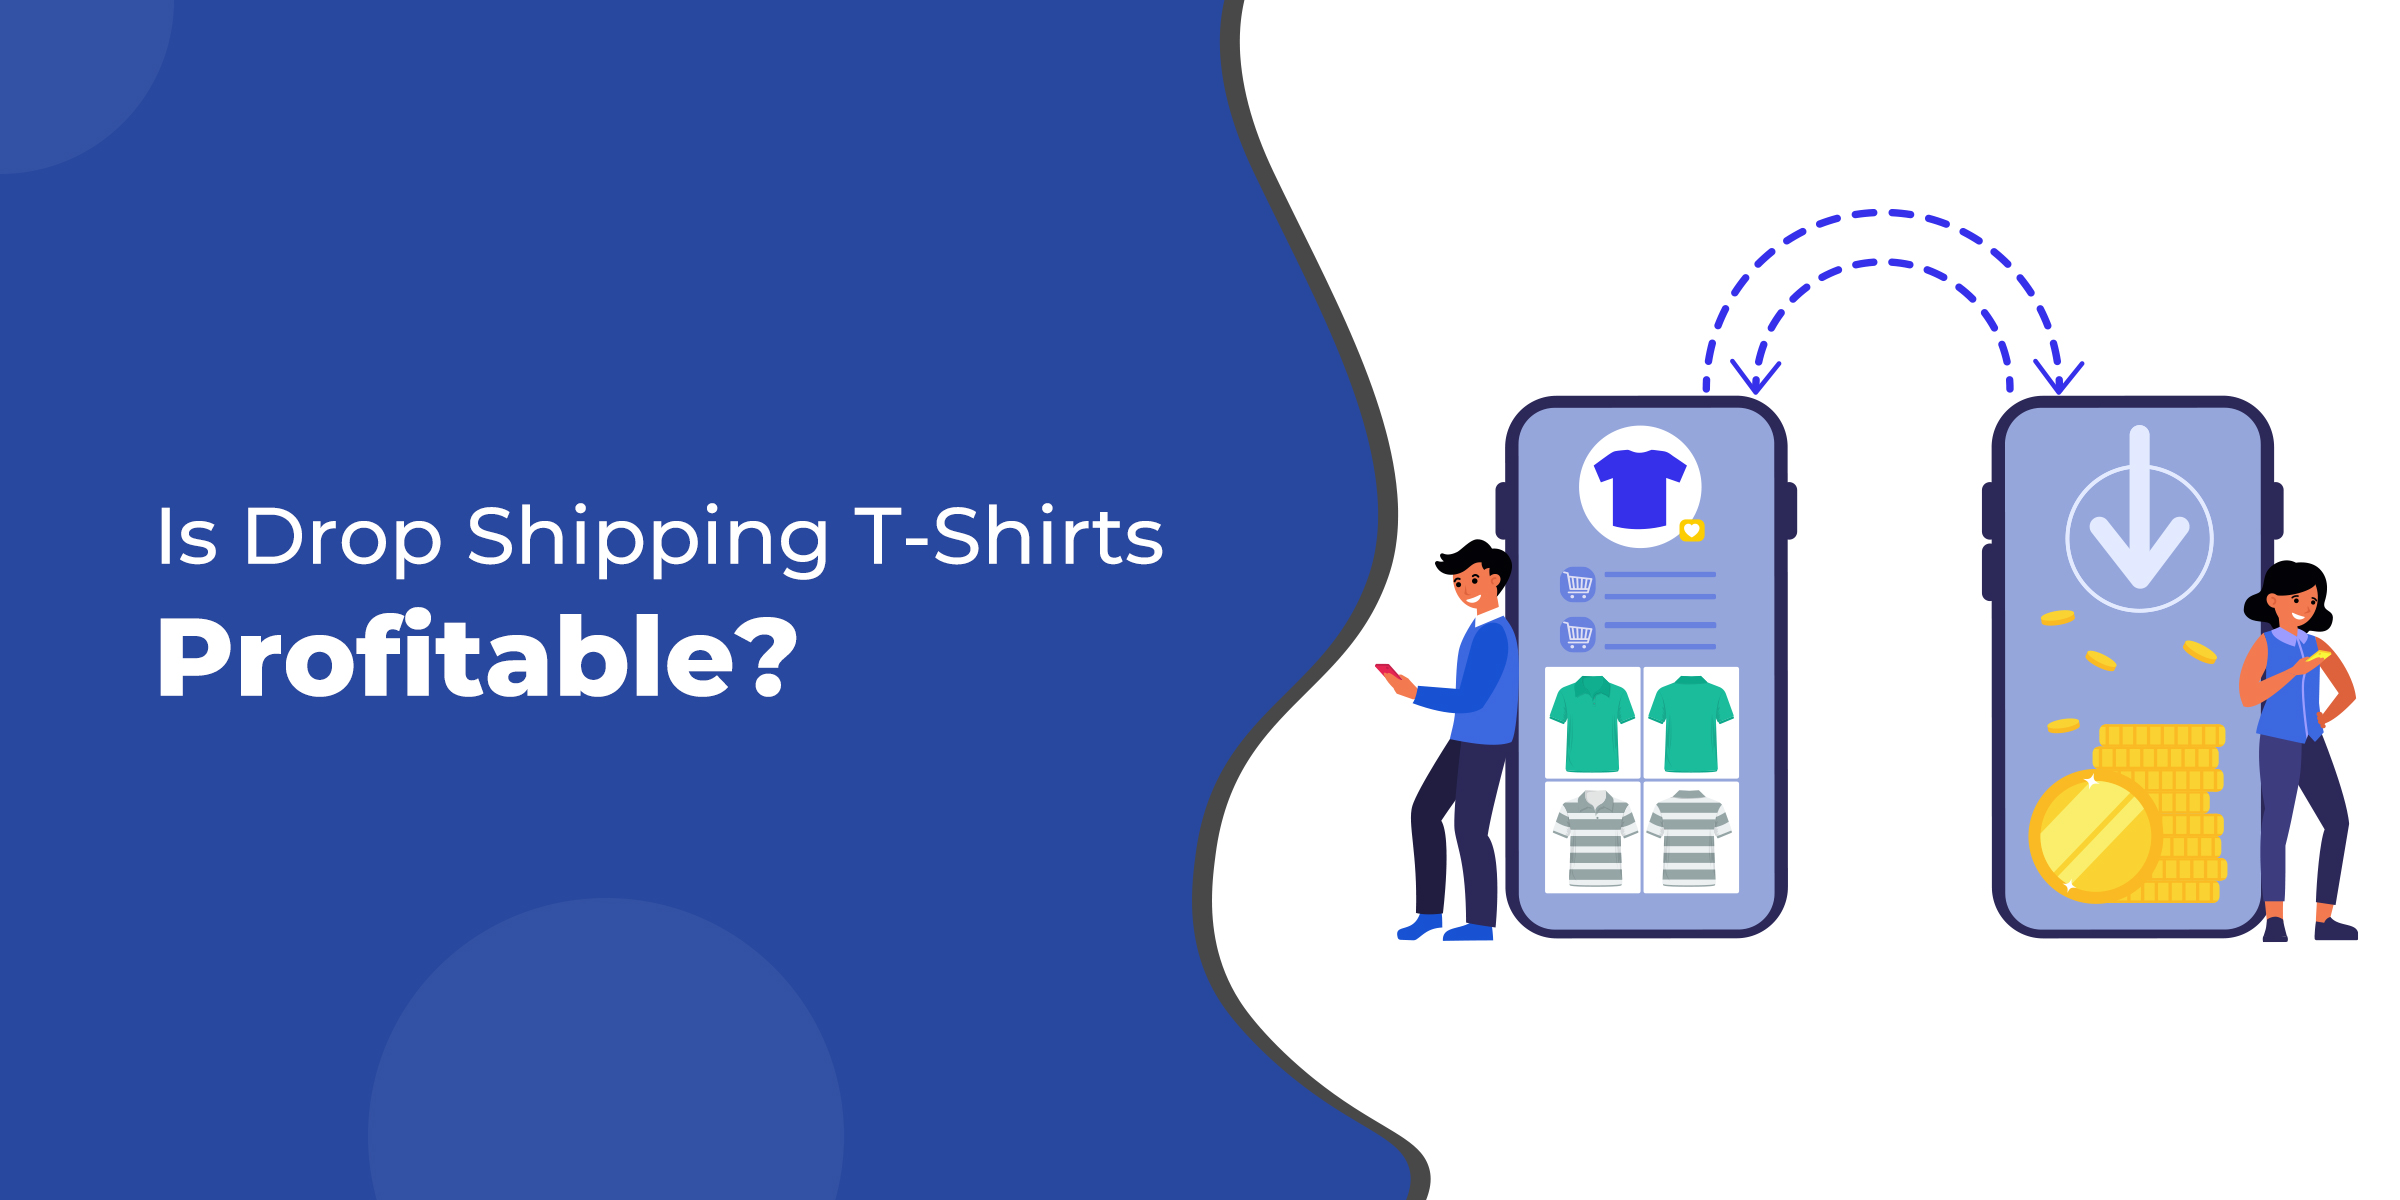 Is Drop Shipping T-Shirts Profitable?